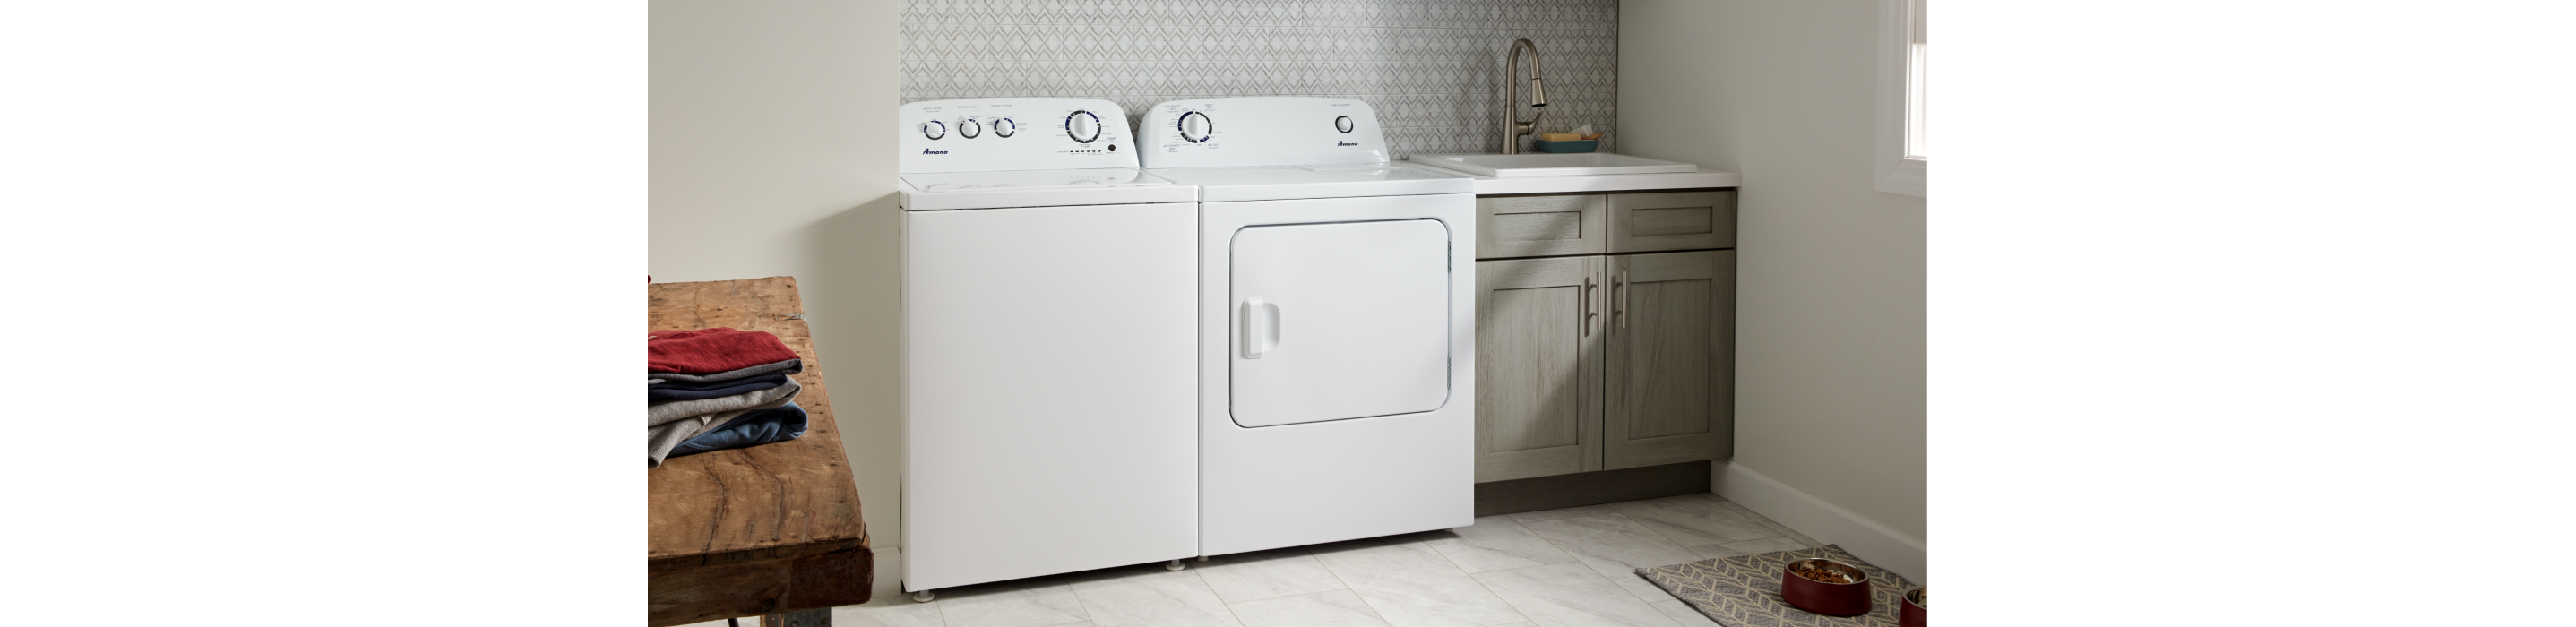 Washer and Dryer Sets | Amana